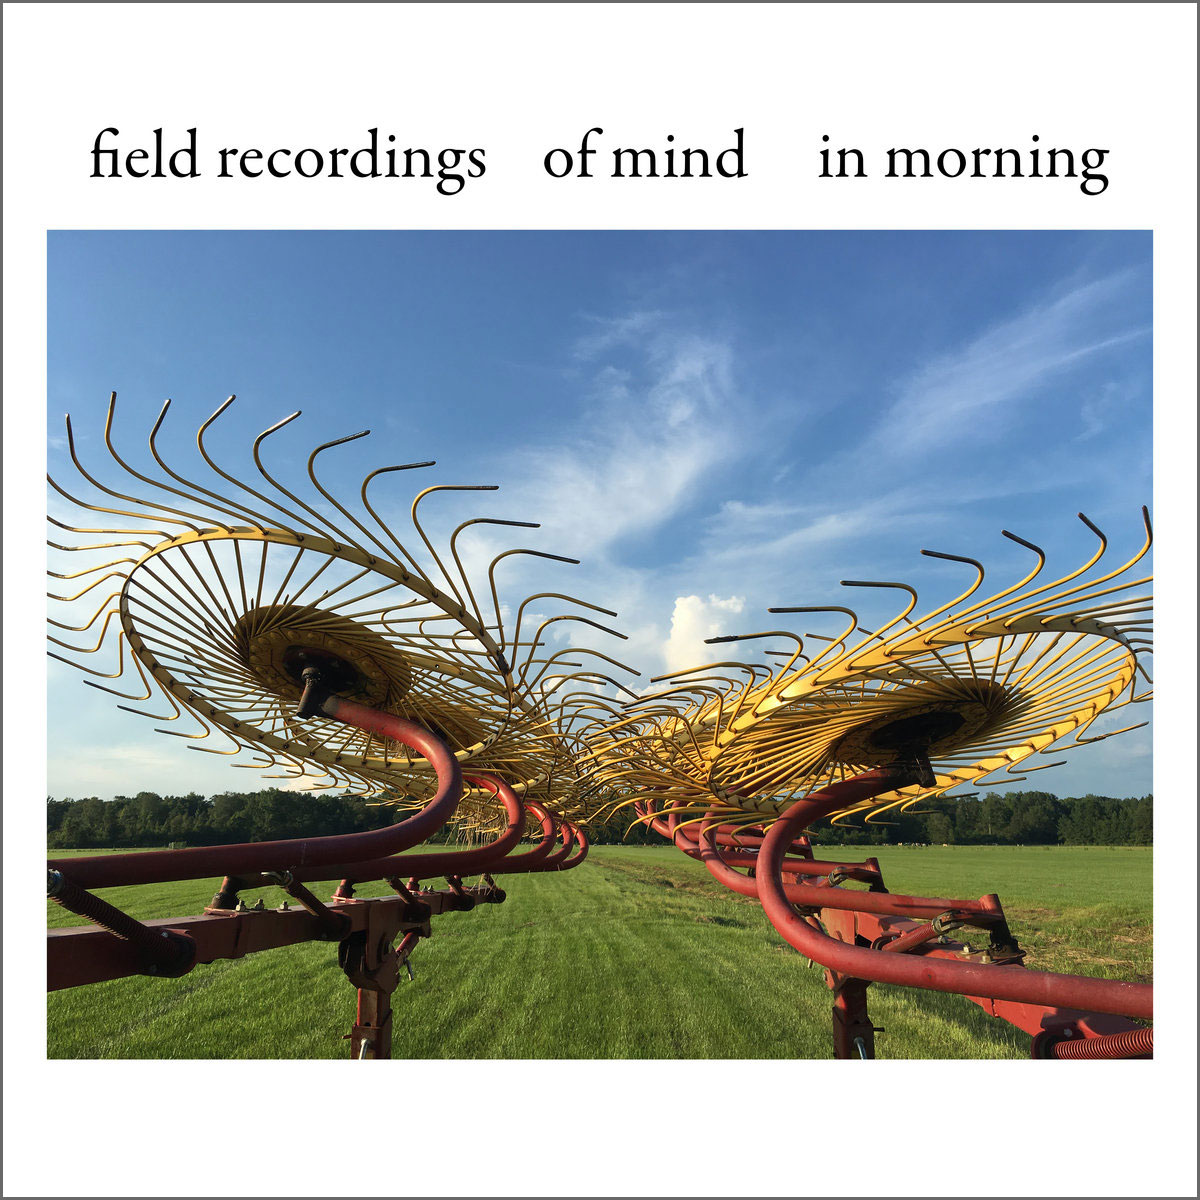 Returning Hank Lazers field recordings of mind in morning